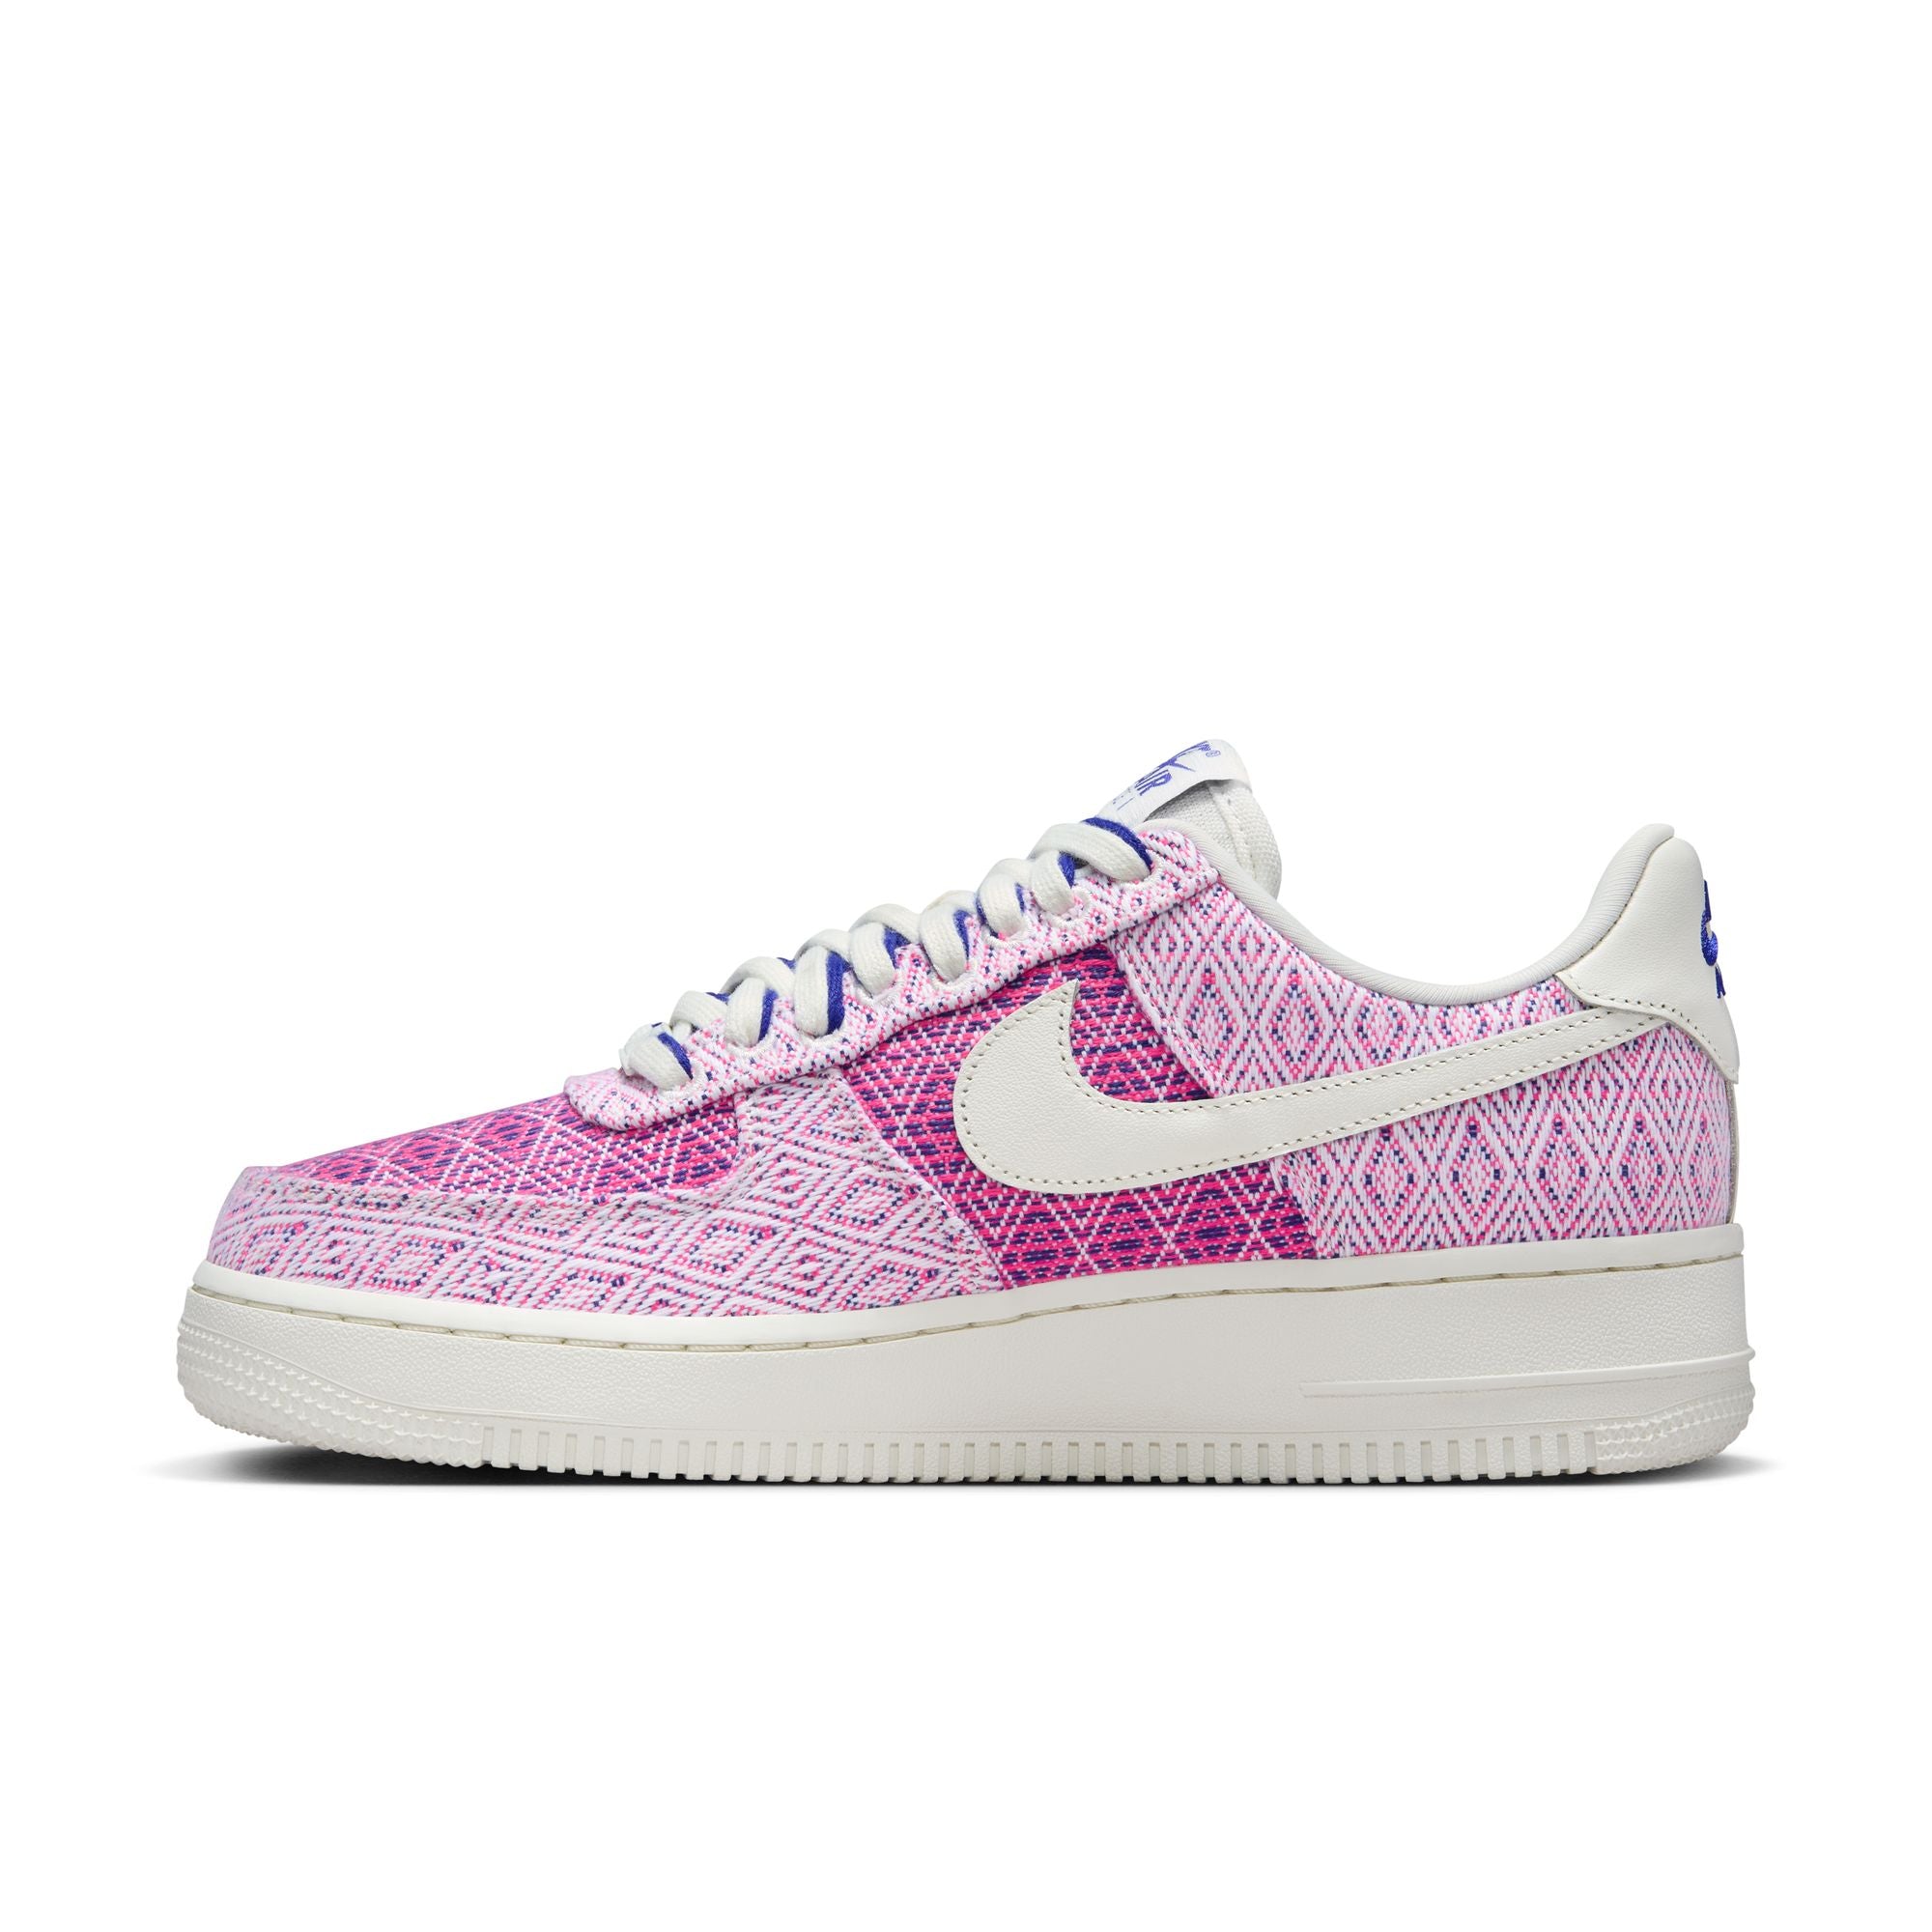 Women's Nike Air Force 1 '07 'Woven Together'